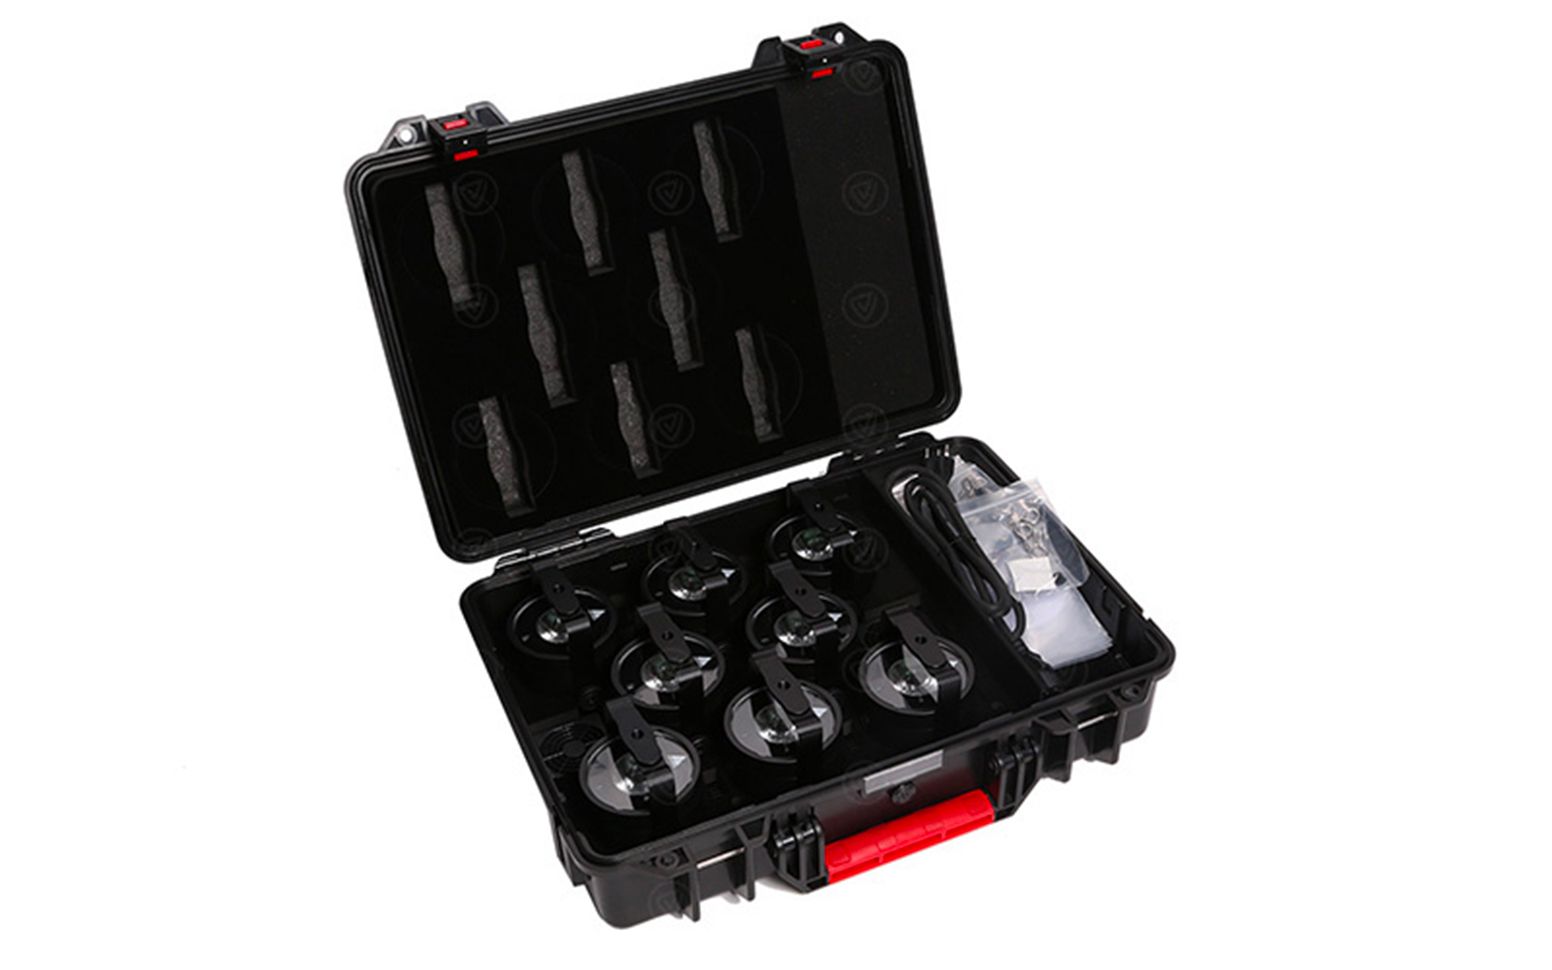 ASTERA - Complete kit of 8 AX3 modules + charging case + accessories